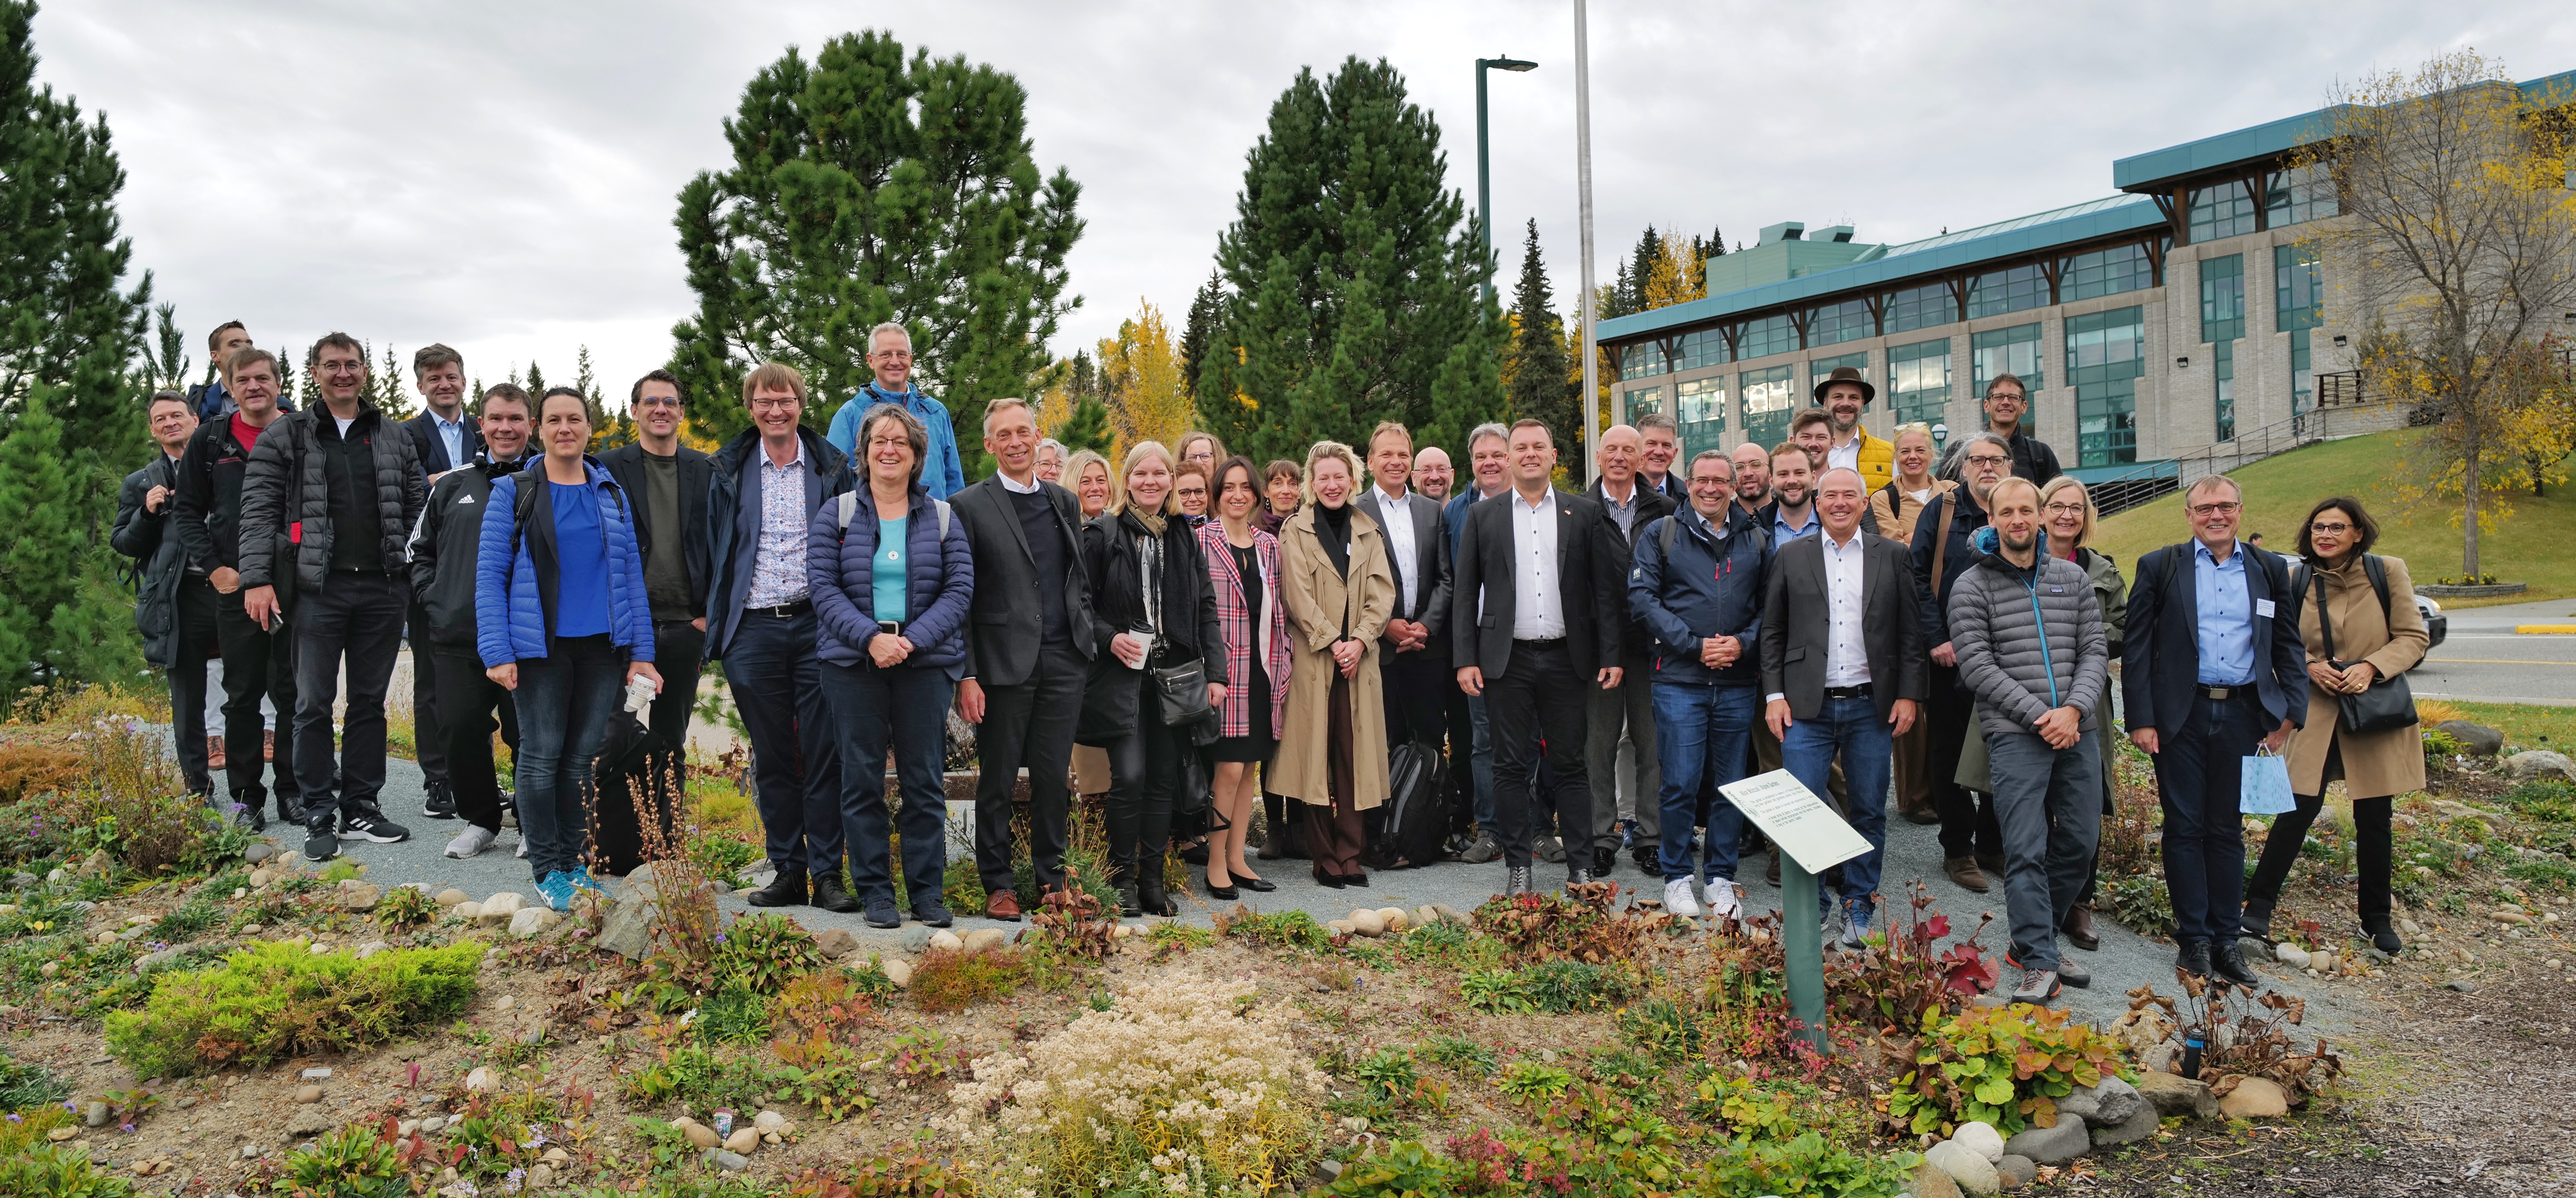 Group picture of the University of Northern British Columbia (UNBC) in Prince George, Kanada